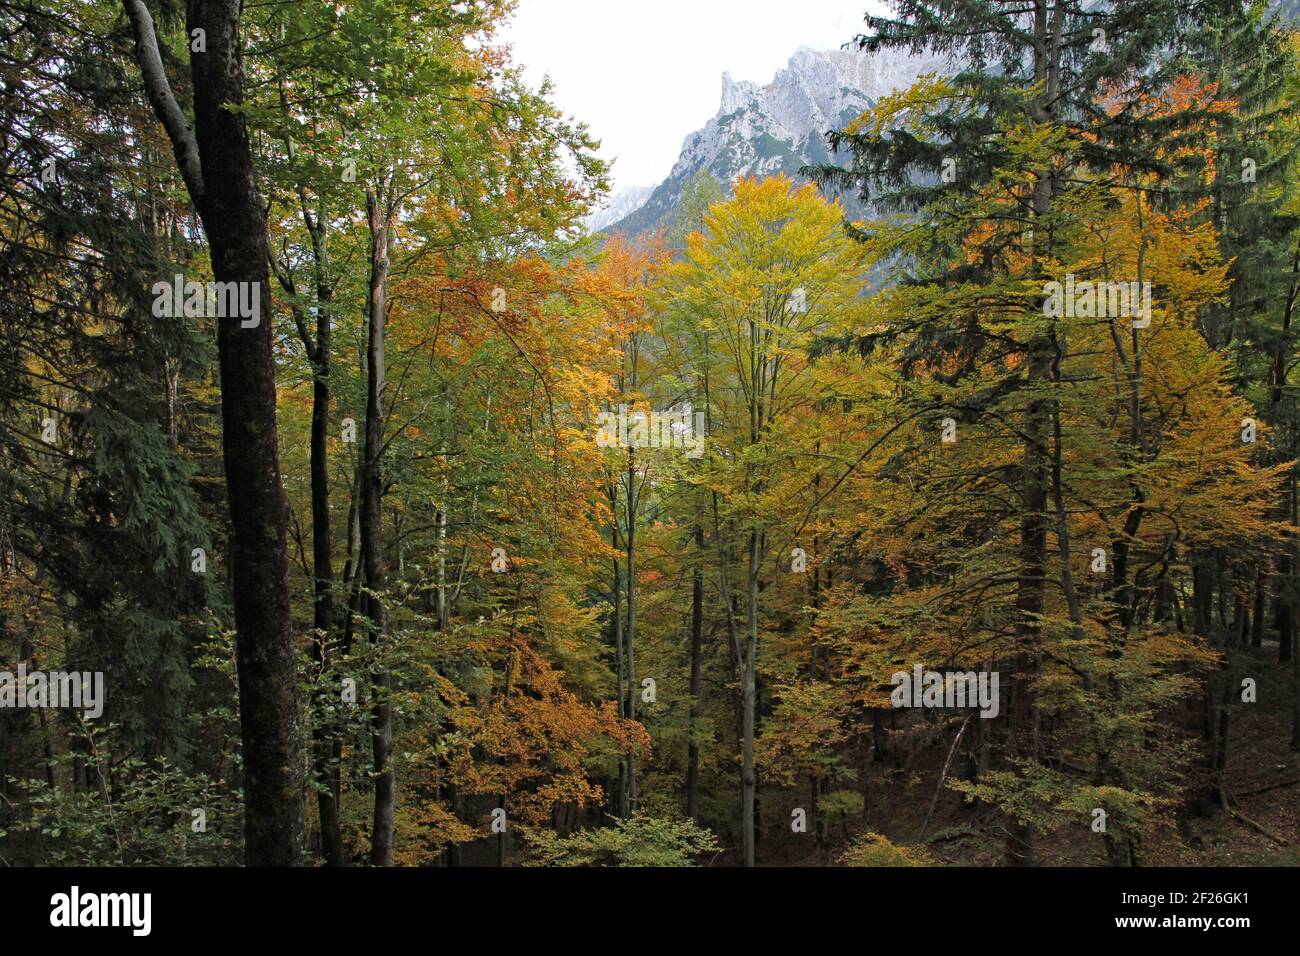 View of the Bavarian forest in Autumn near Mittenwald showing all the colors of the season and mountains in the background Stock Photo